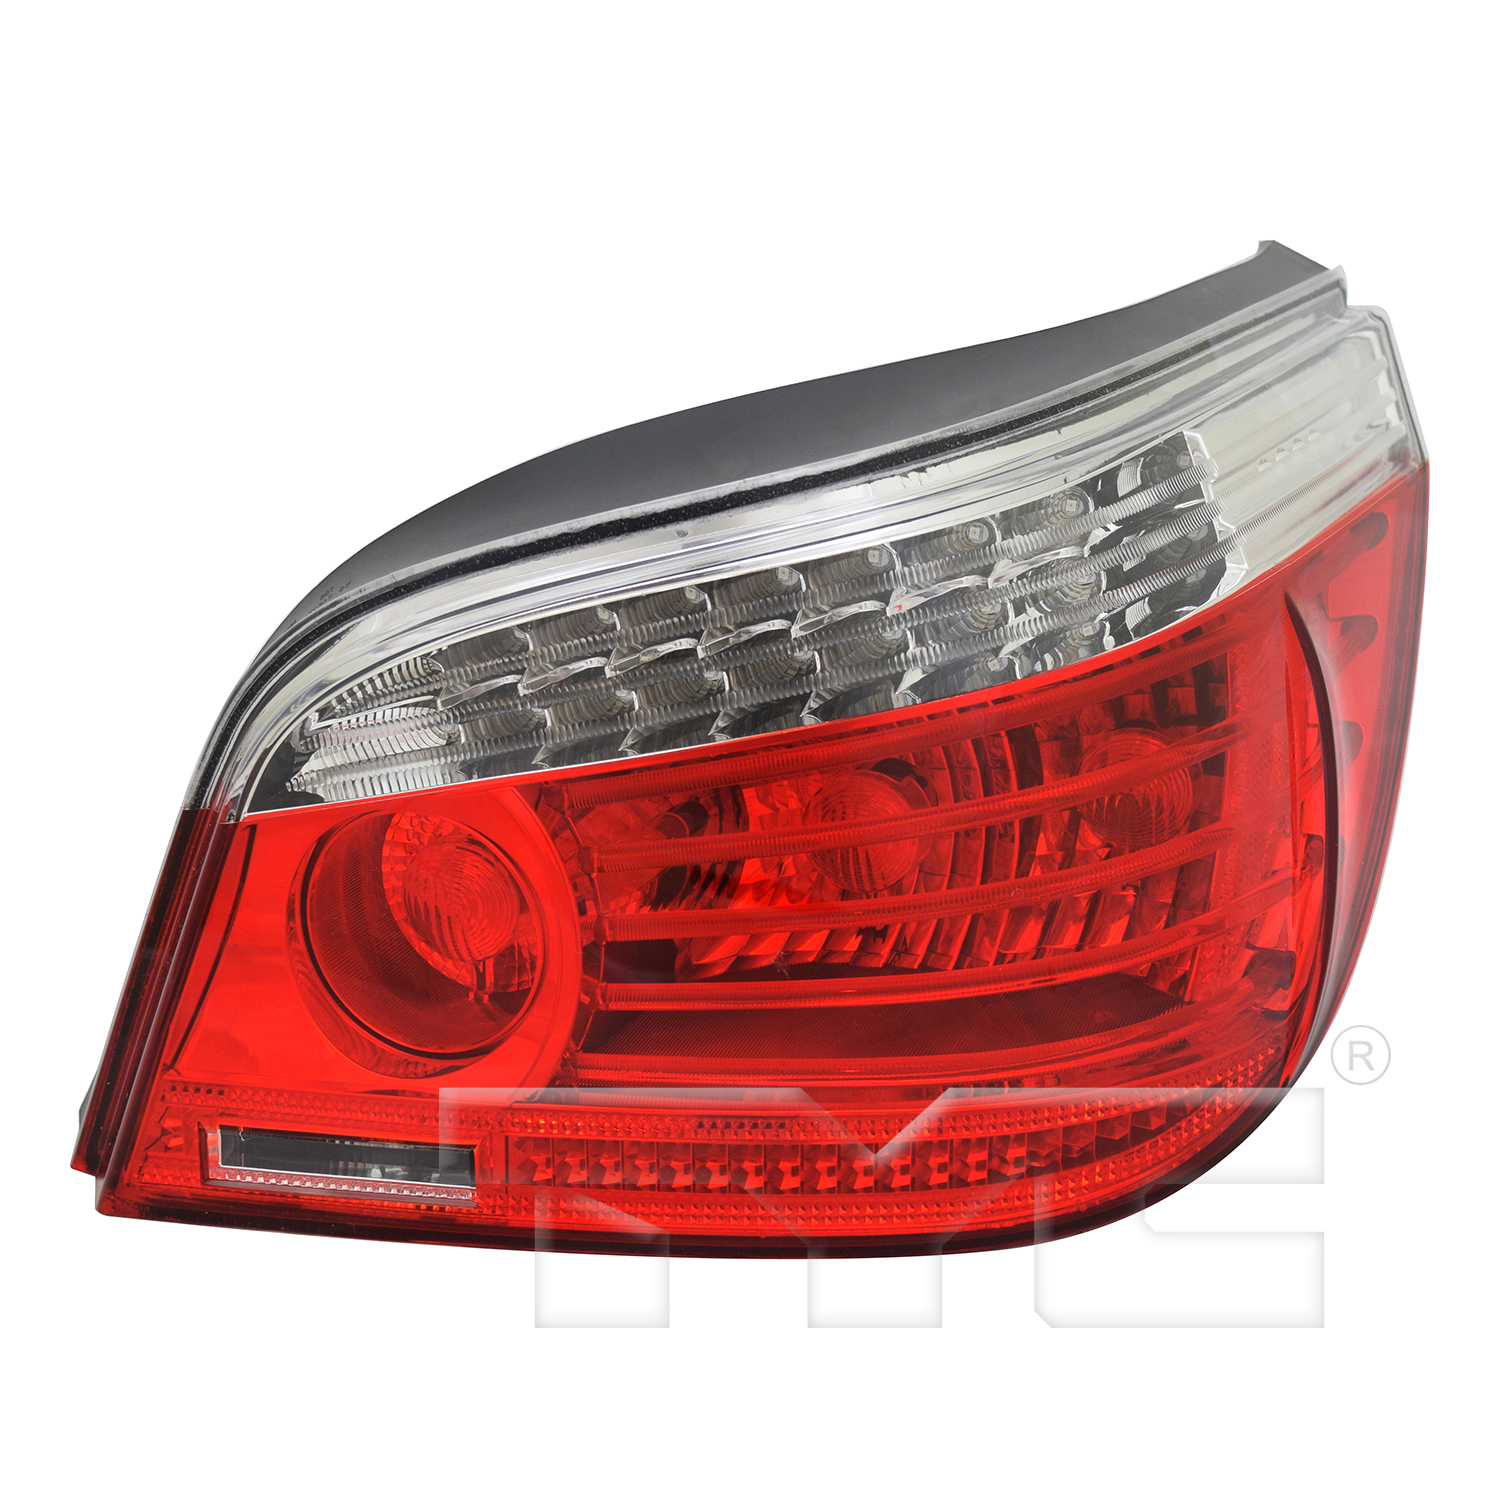 Aftermarket TAILLIGHTS for BMW - 535I, 535i,08-10,RT Taillamp assy